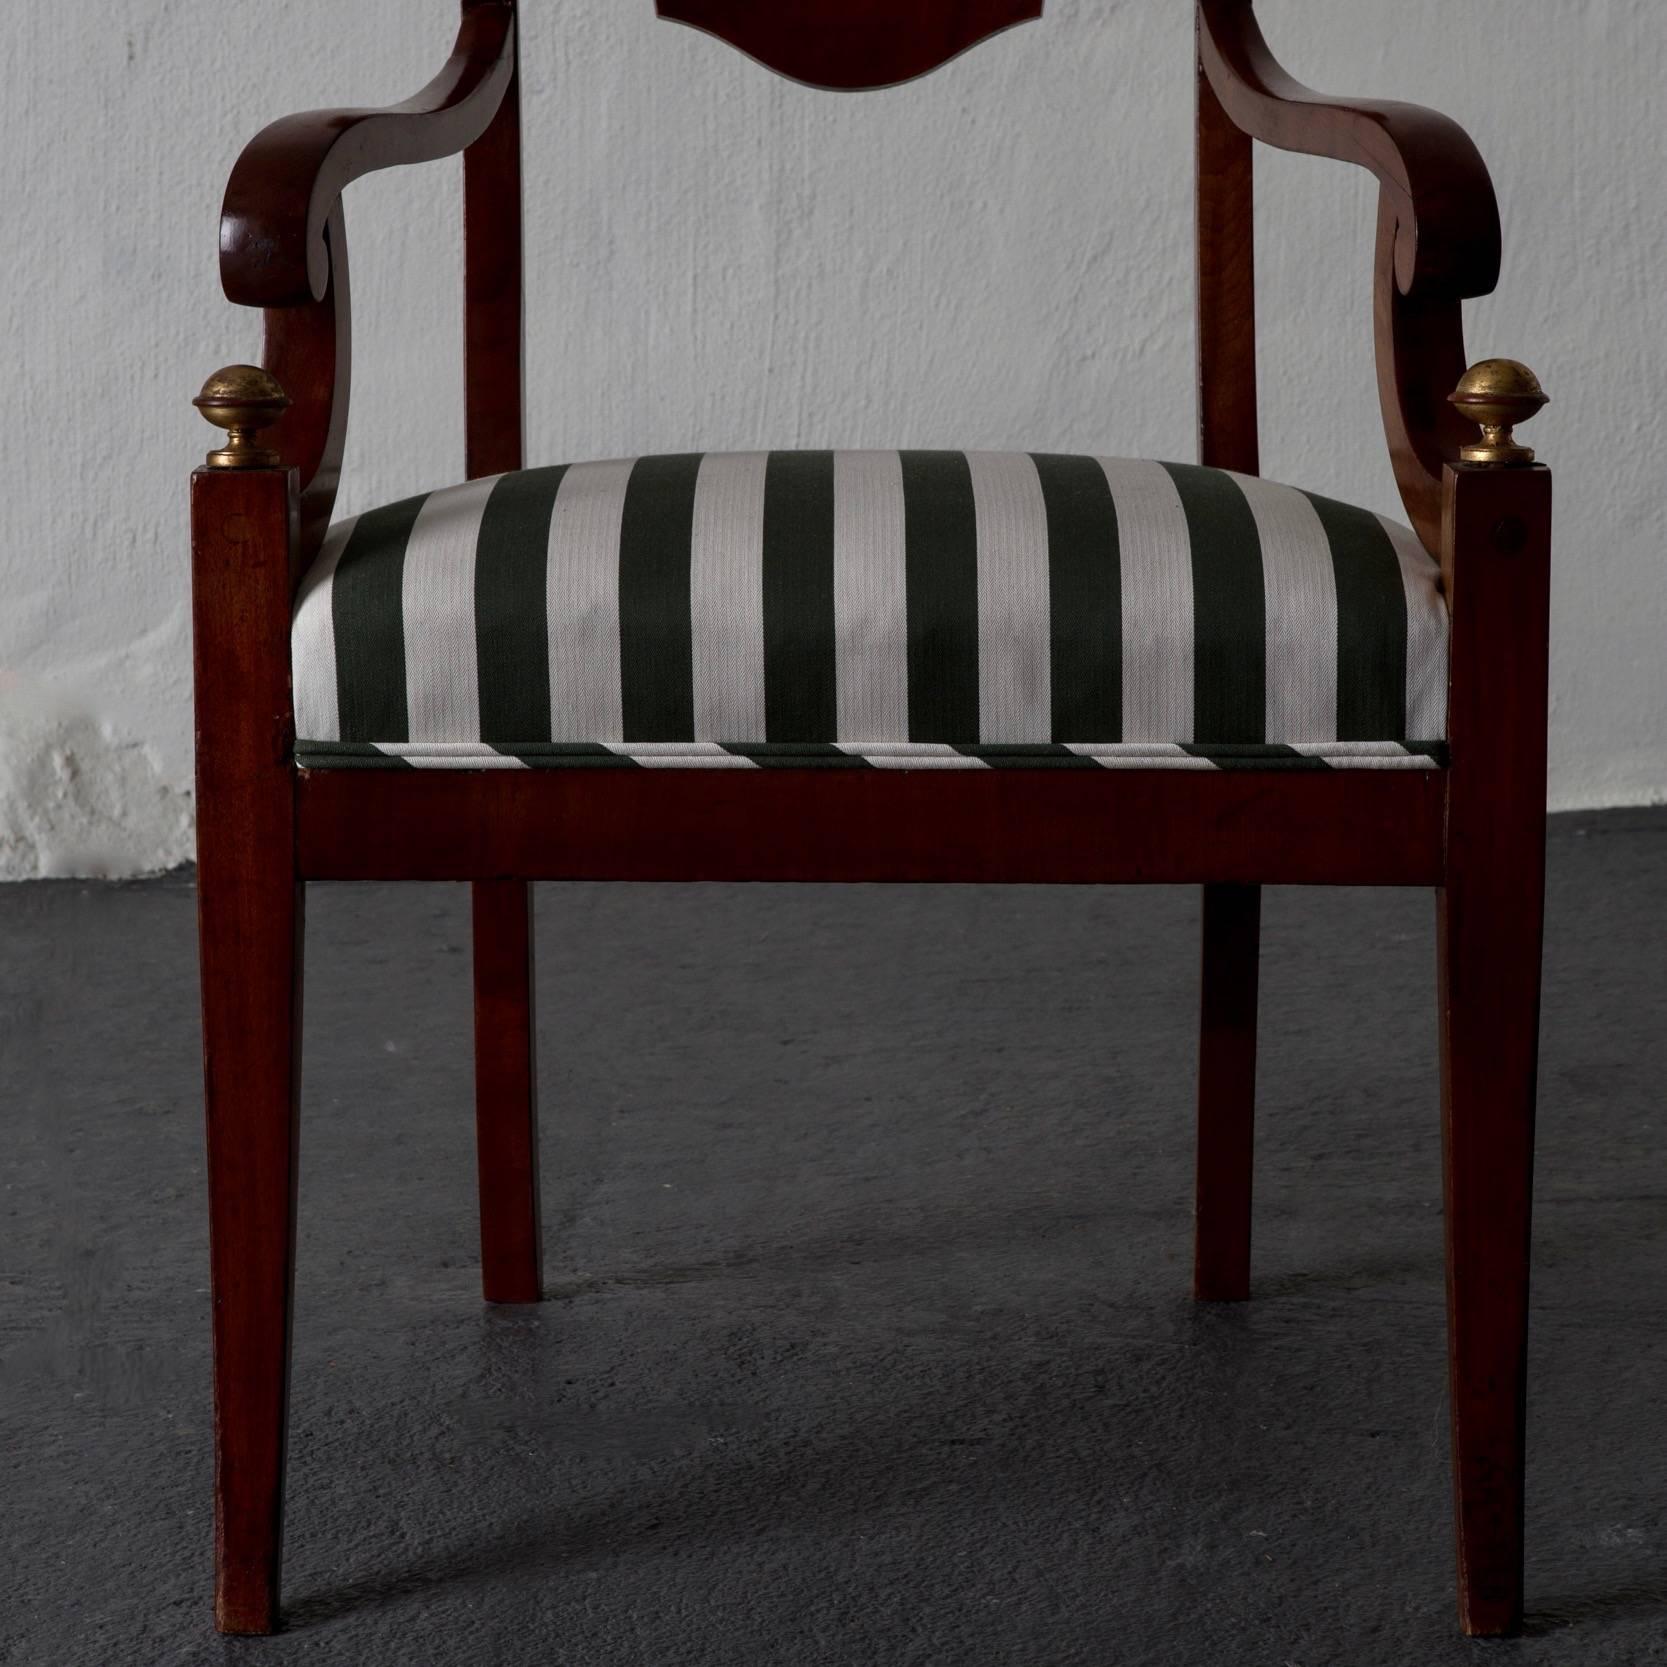 Armchairs Pair of Swedish Mahogany Brown Gilded Details Green and White Seat For Sale 4